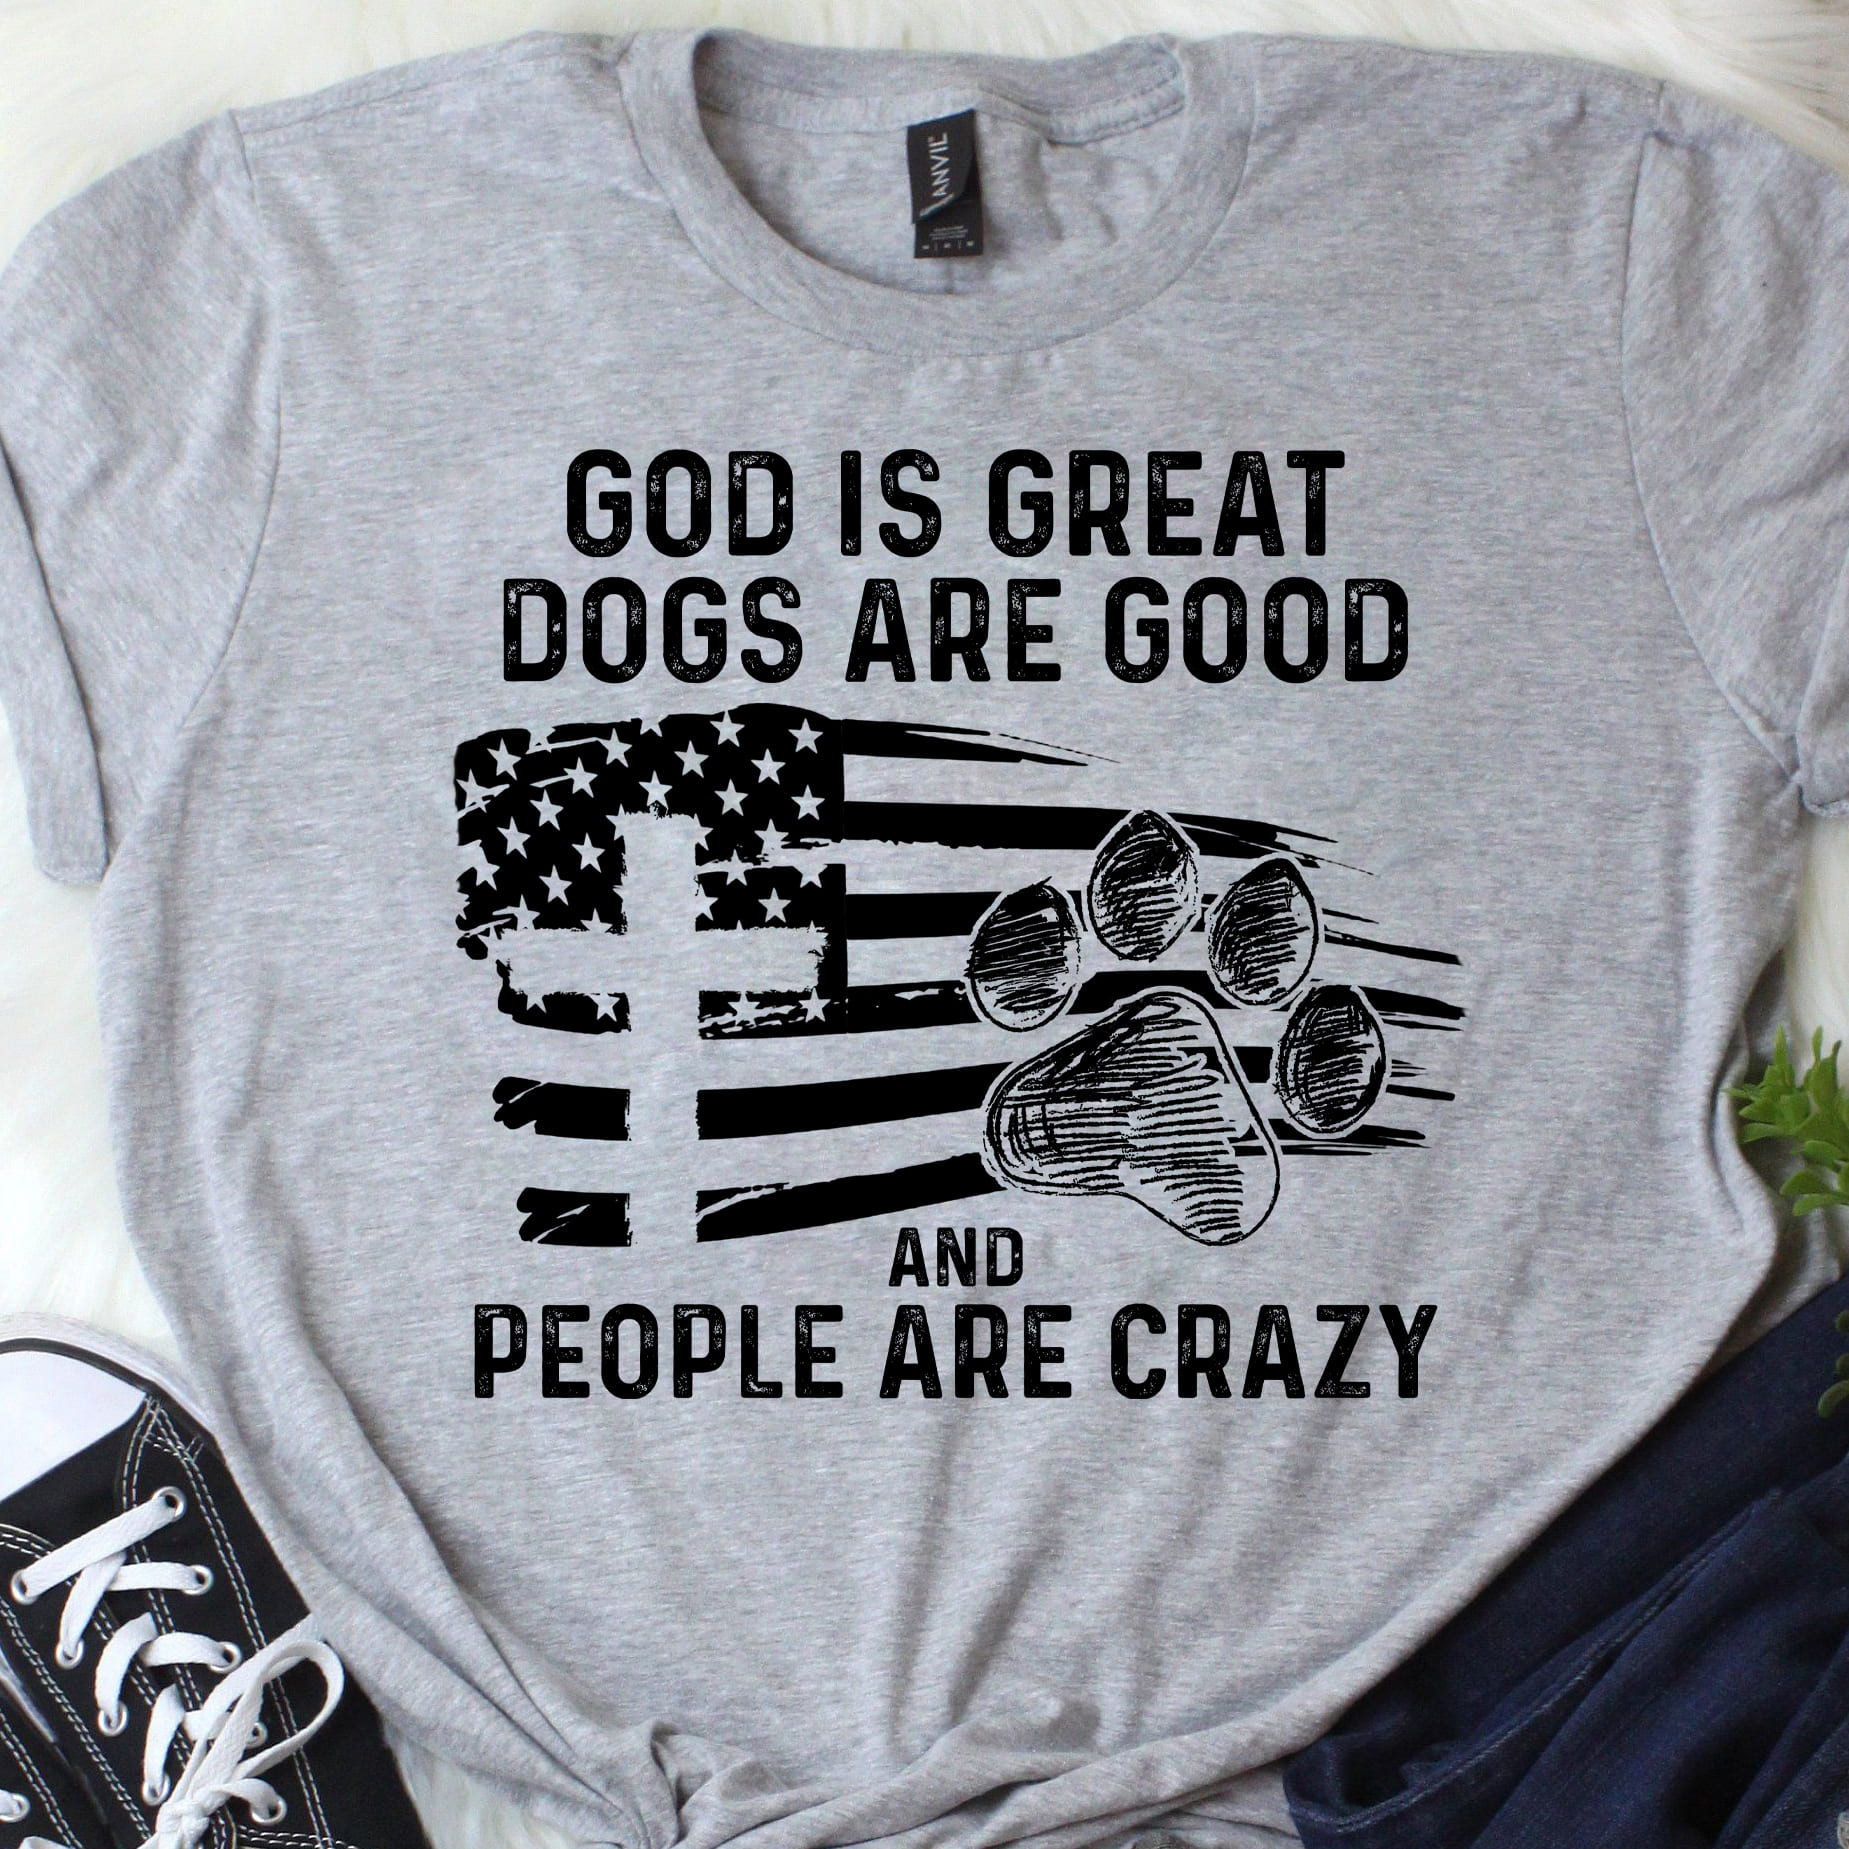 God is great, Dogs are good and people are crazy - America nation under God